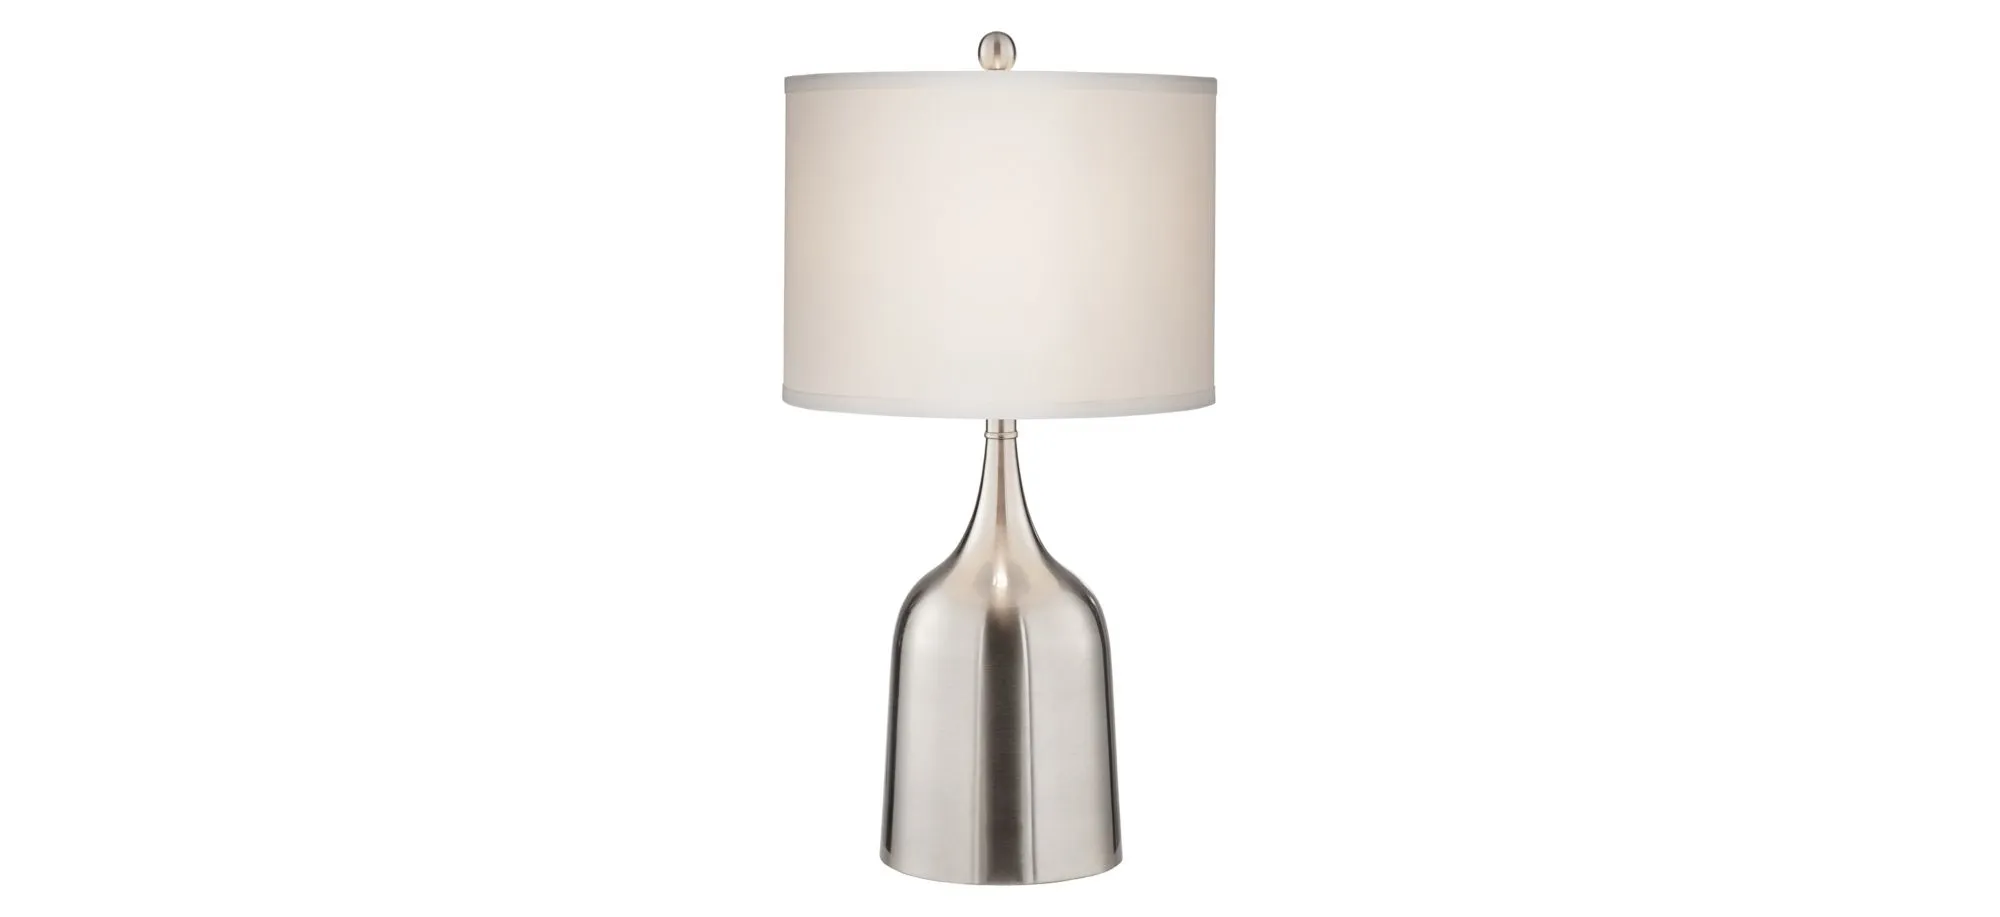 Pacific Coast Brushed Steel Table Lamp in Brushed Nickel/Brushed Steel by Pacific Coast